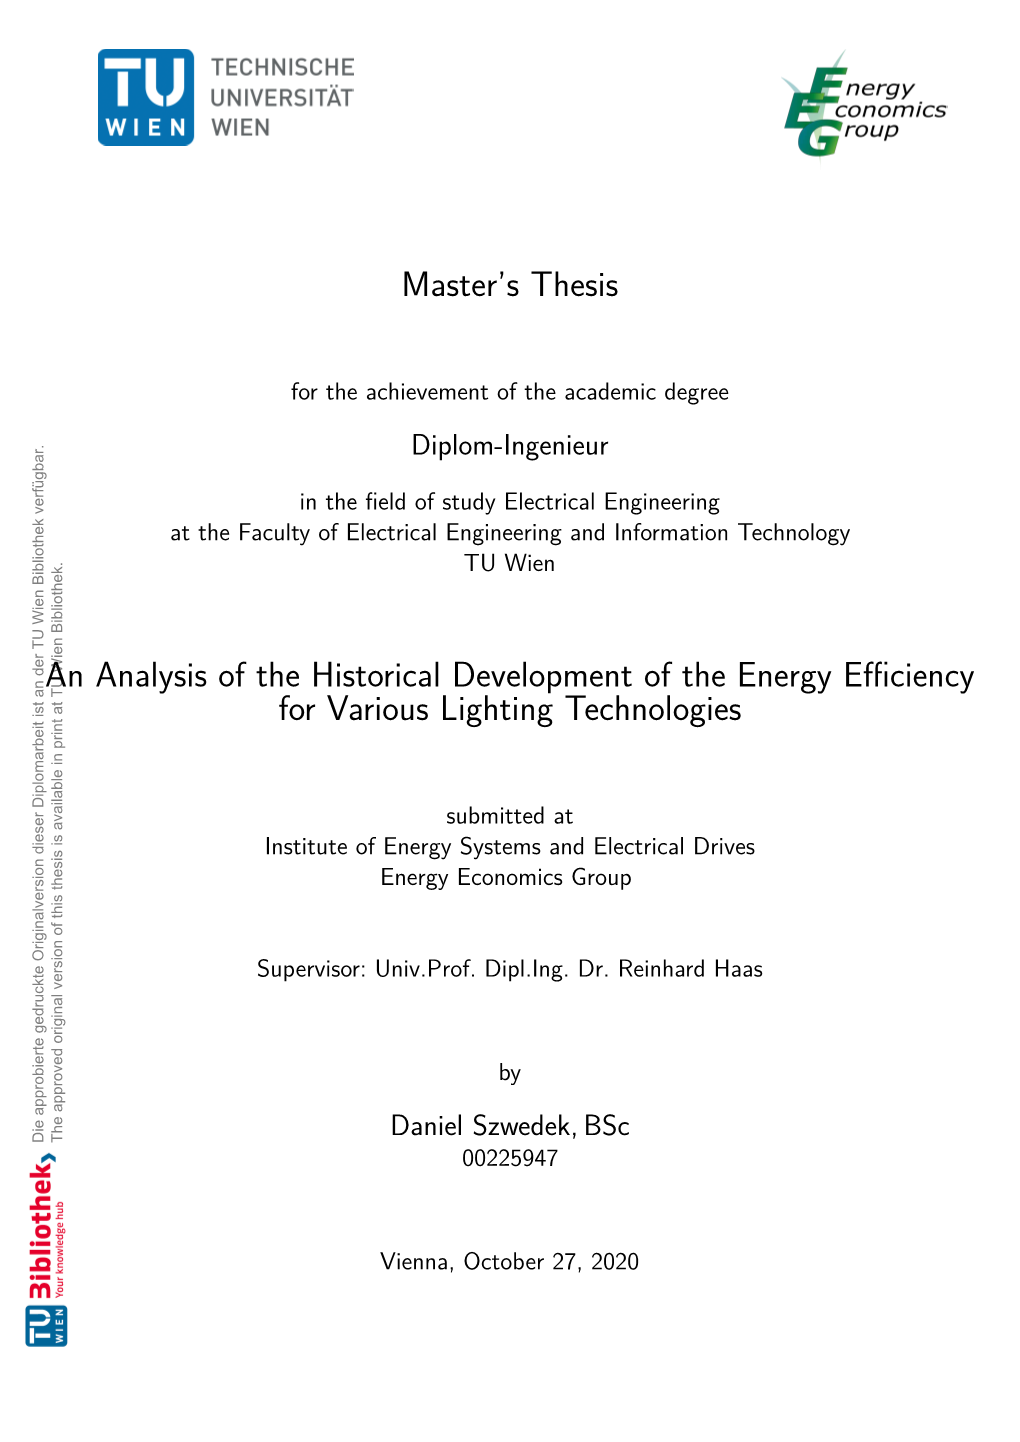 An Analysis of the Historical Development of the Energy